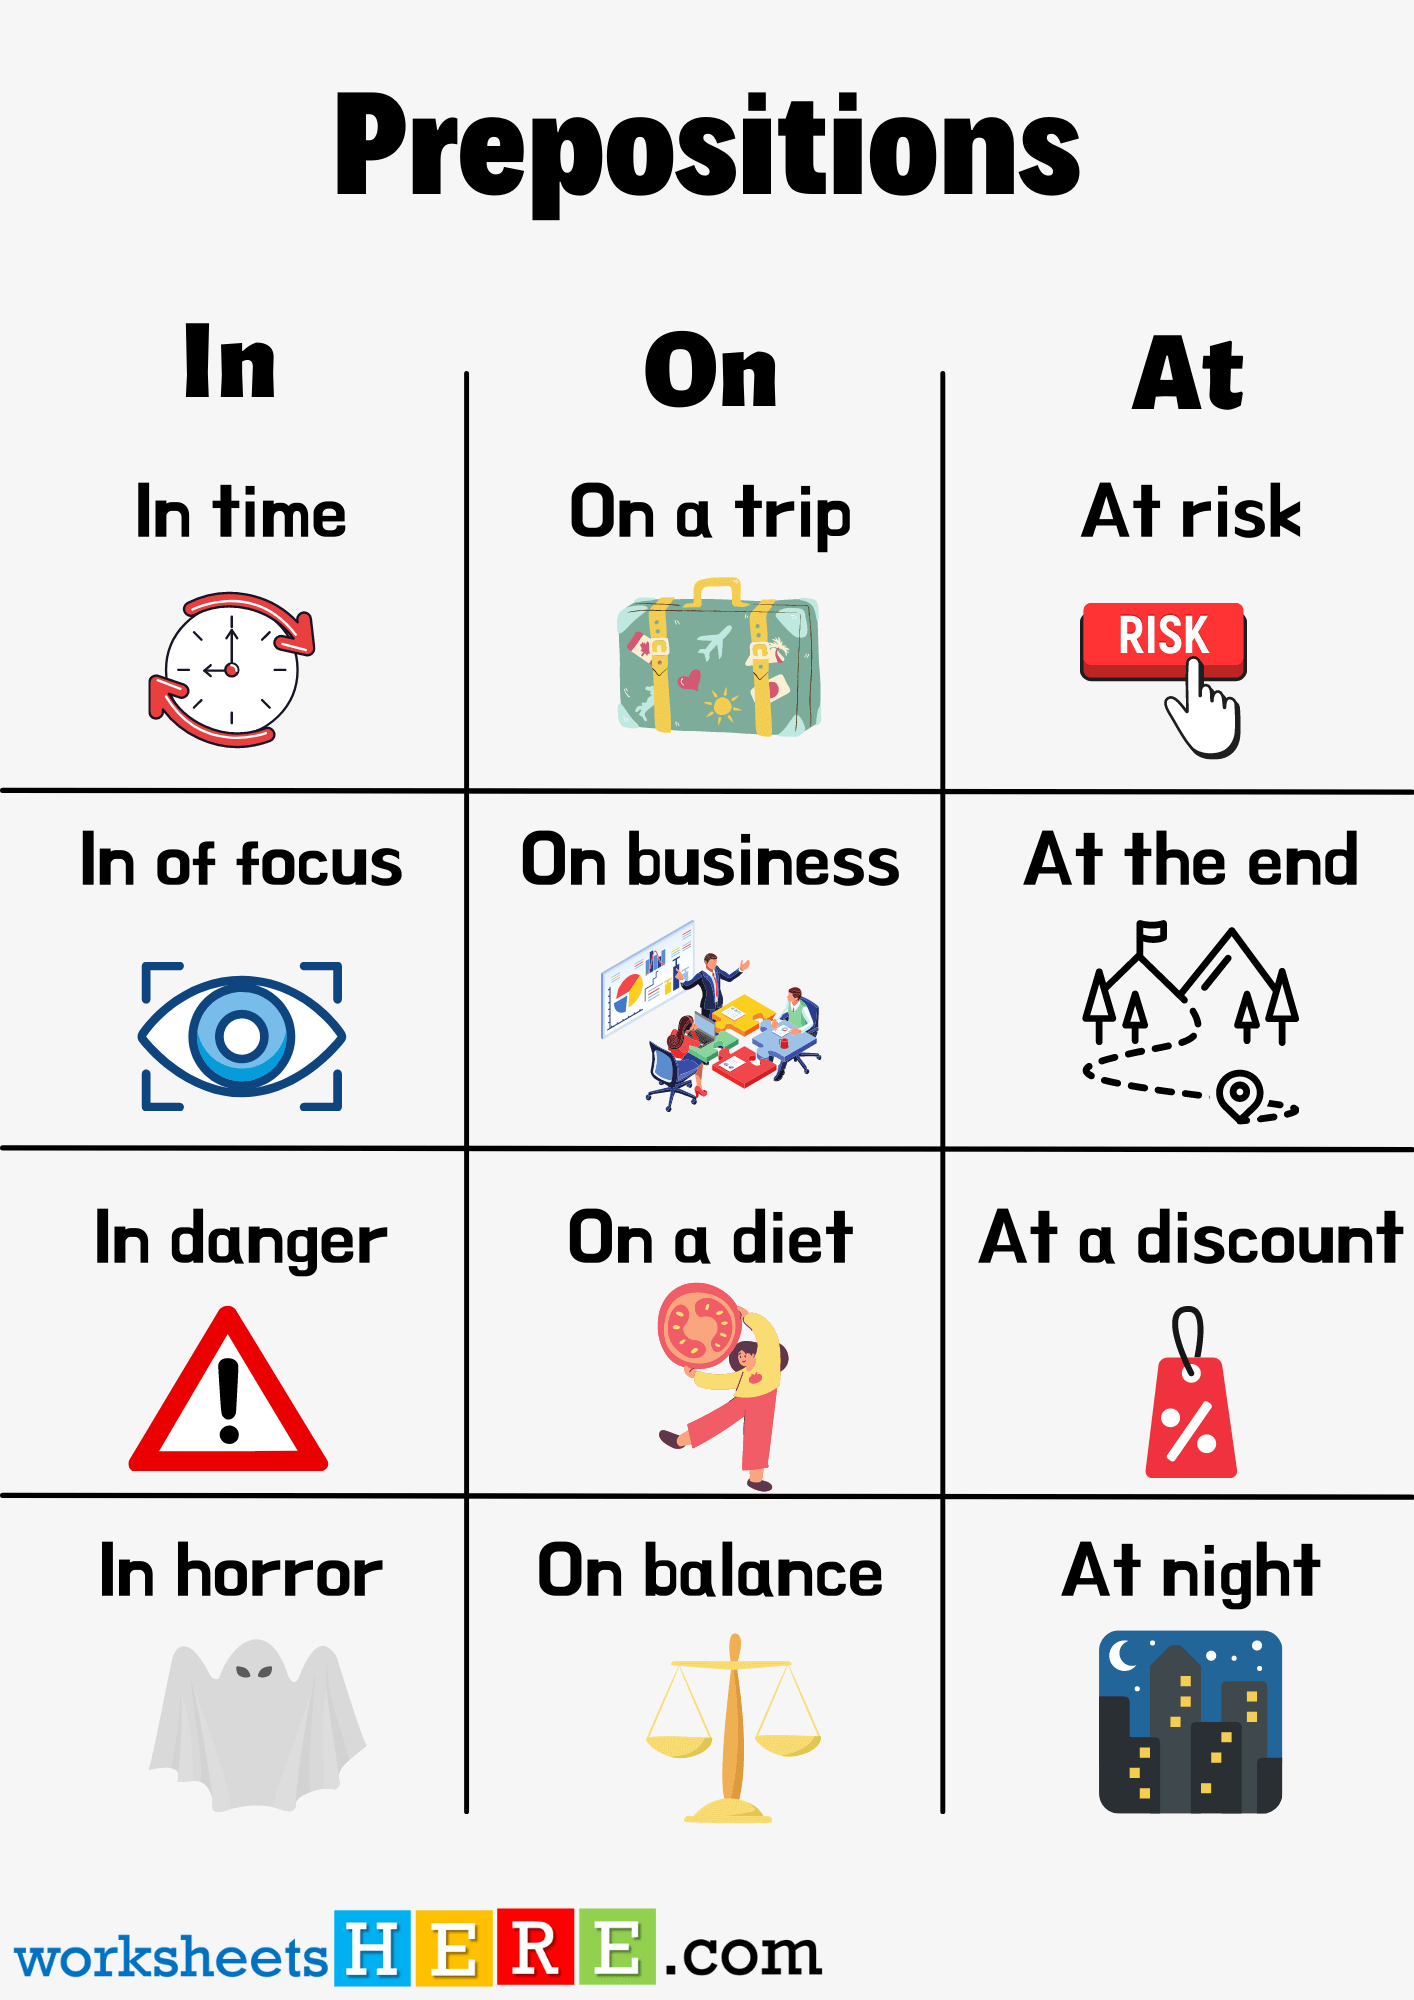 Prepositions Examples With Pictures Worksheets, In On At Prepositions List with Pictures